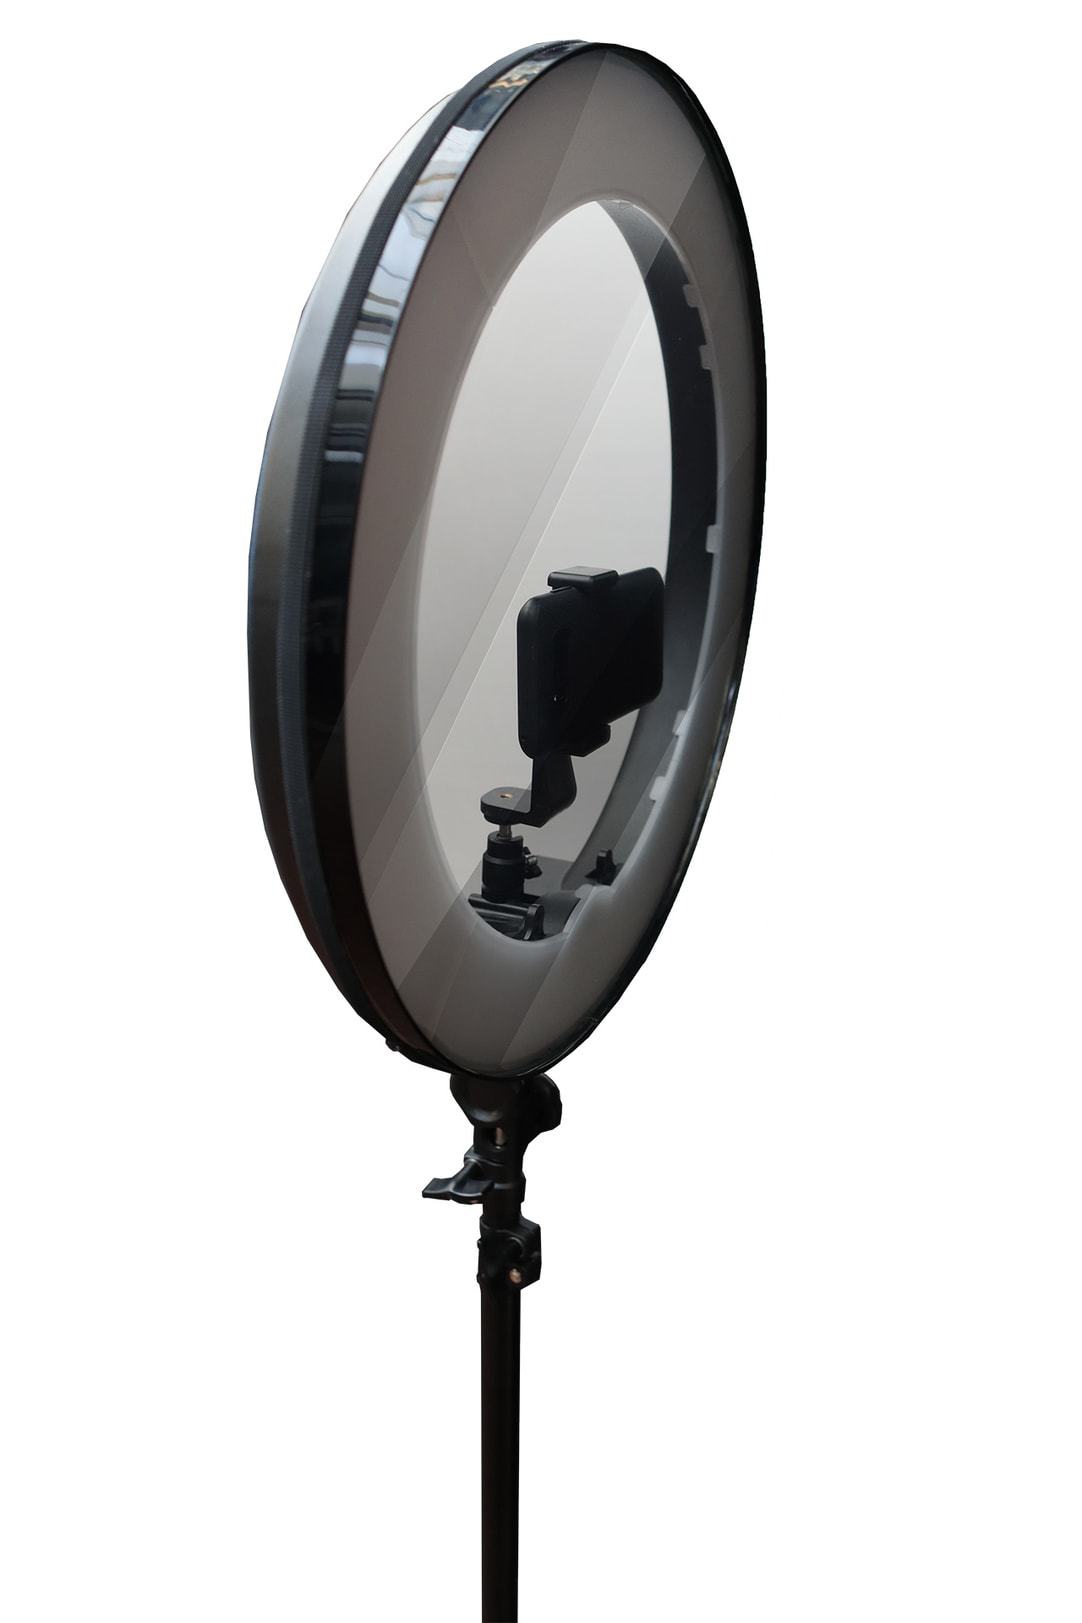 Makeup Mirror & Ring Light Combination with Perfect Color! Meet the Beauty Ring  Light - YouTube